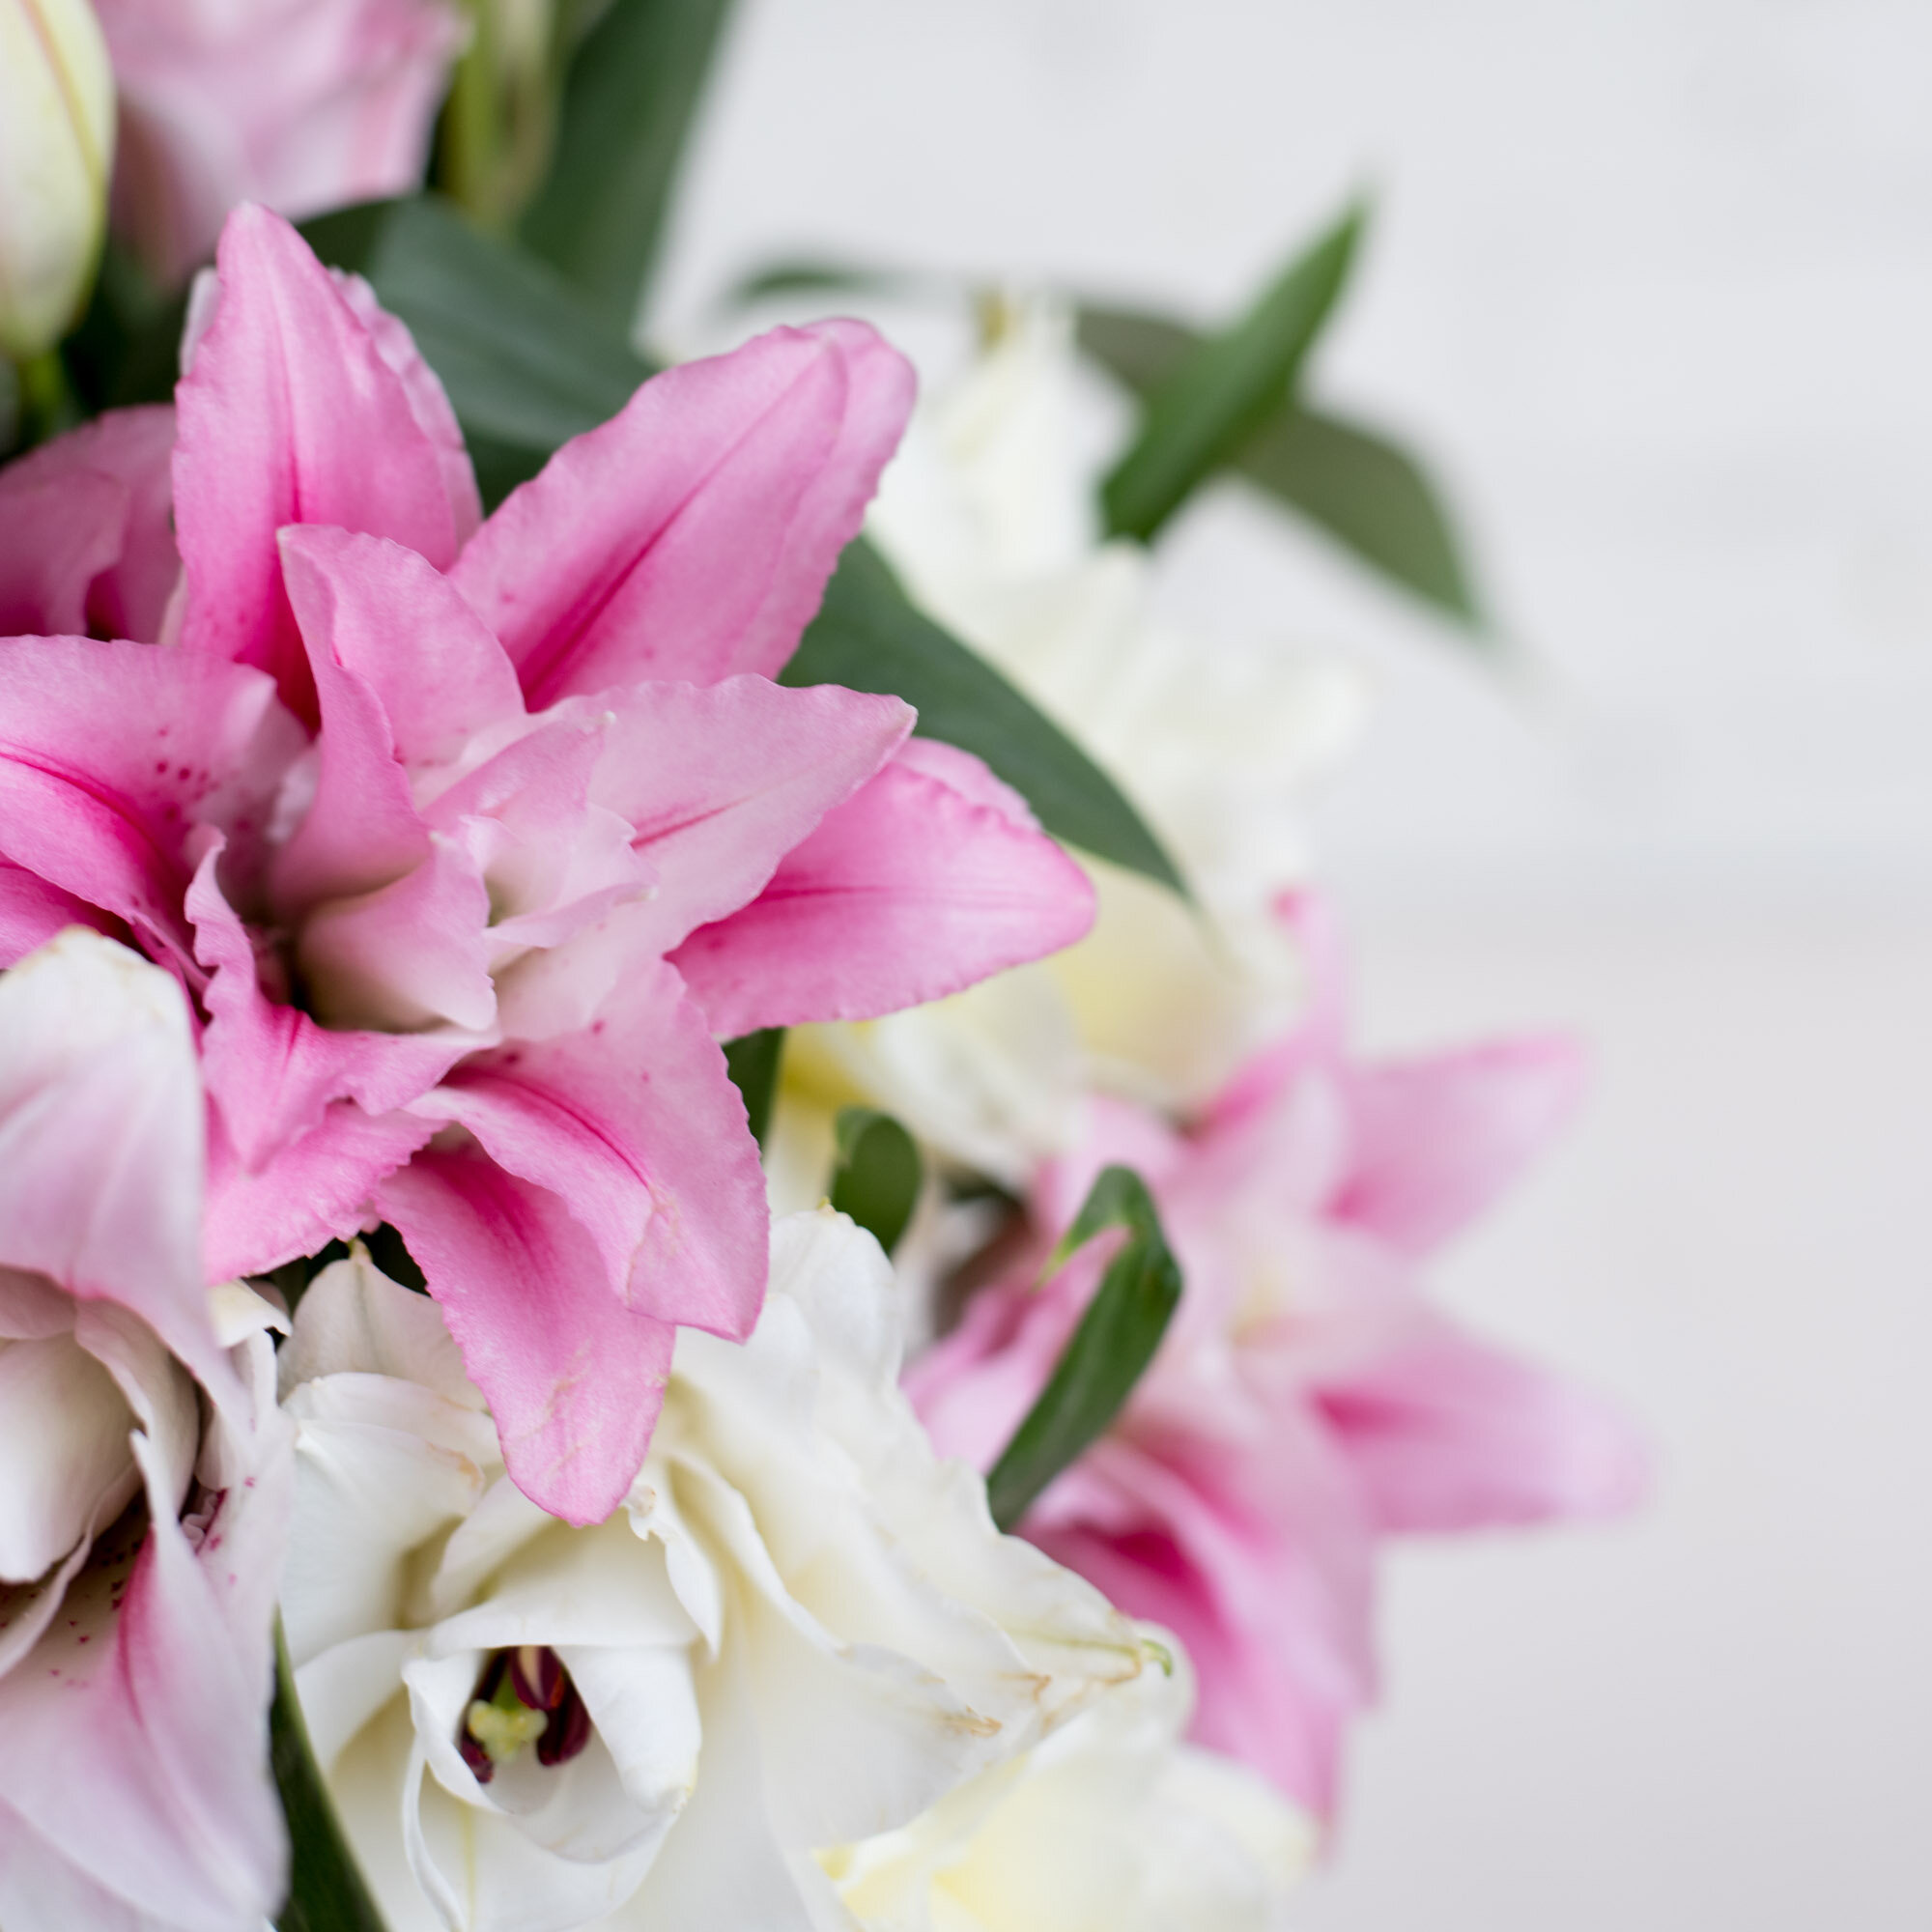 A closeup of pink and white lilies